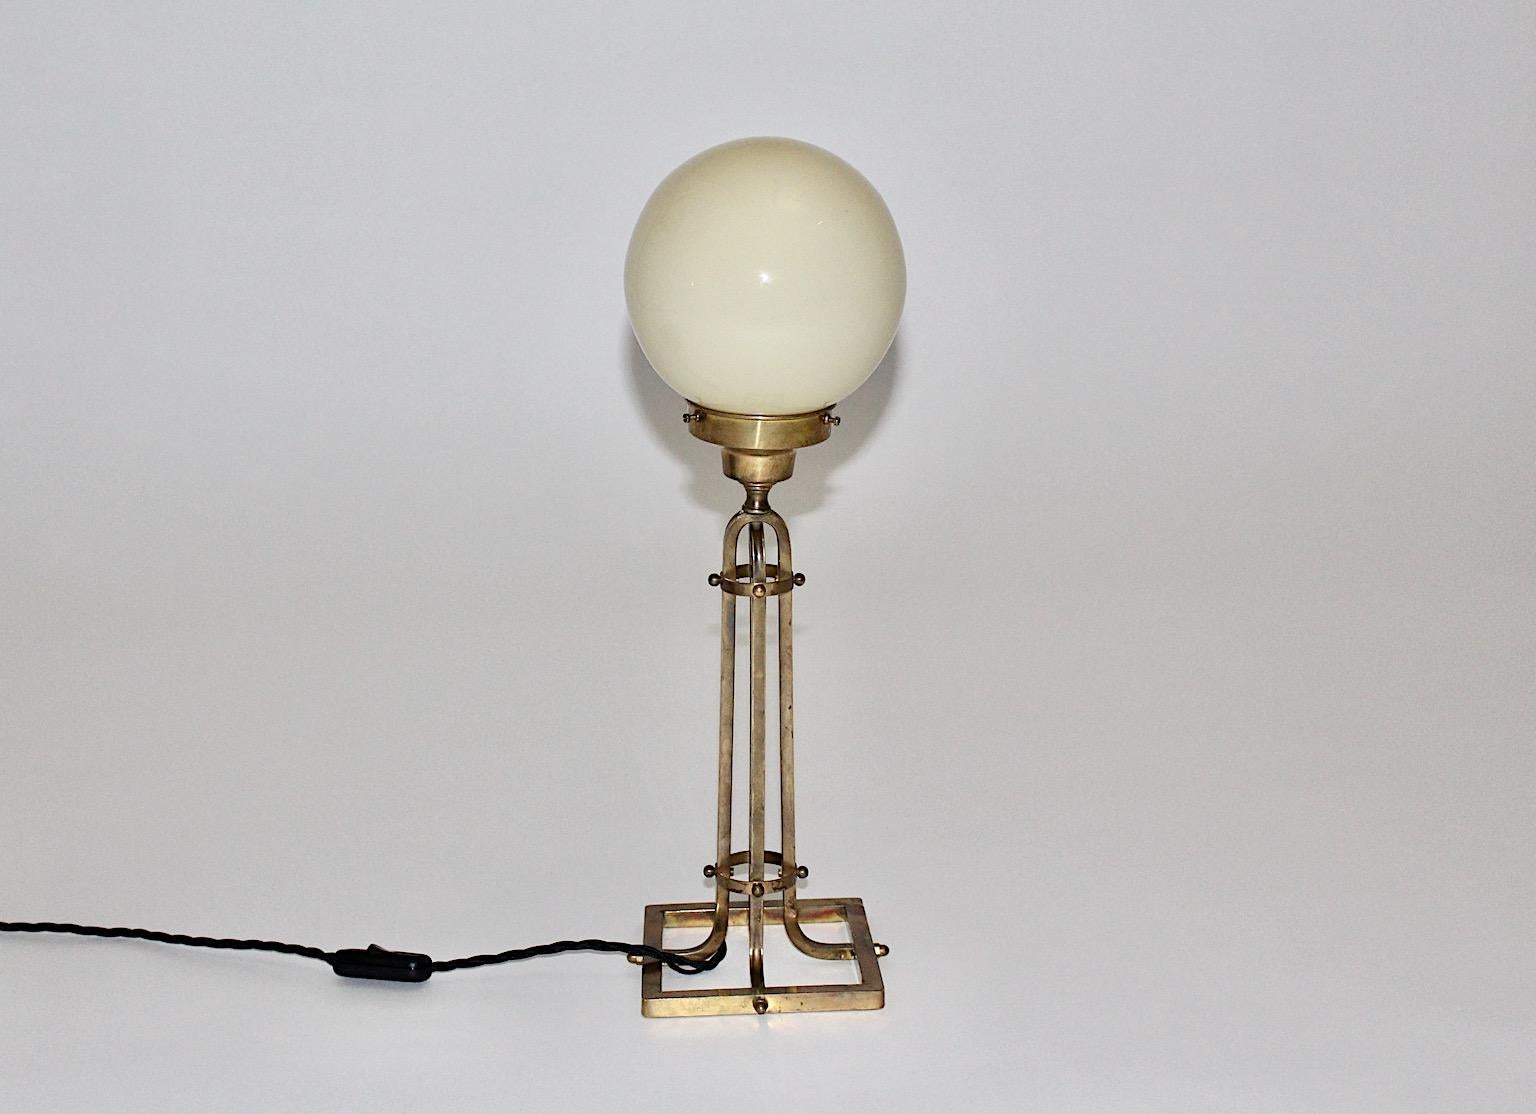 Brass glass vintage table lamp style Vienna Secession, which was made 1950s, Austria.
The brass construction shows beautiful brass patina, while the ivory colored glass shade is in very good condition.
One E 27 socket and on/off switch
Very good